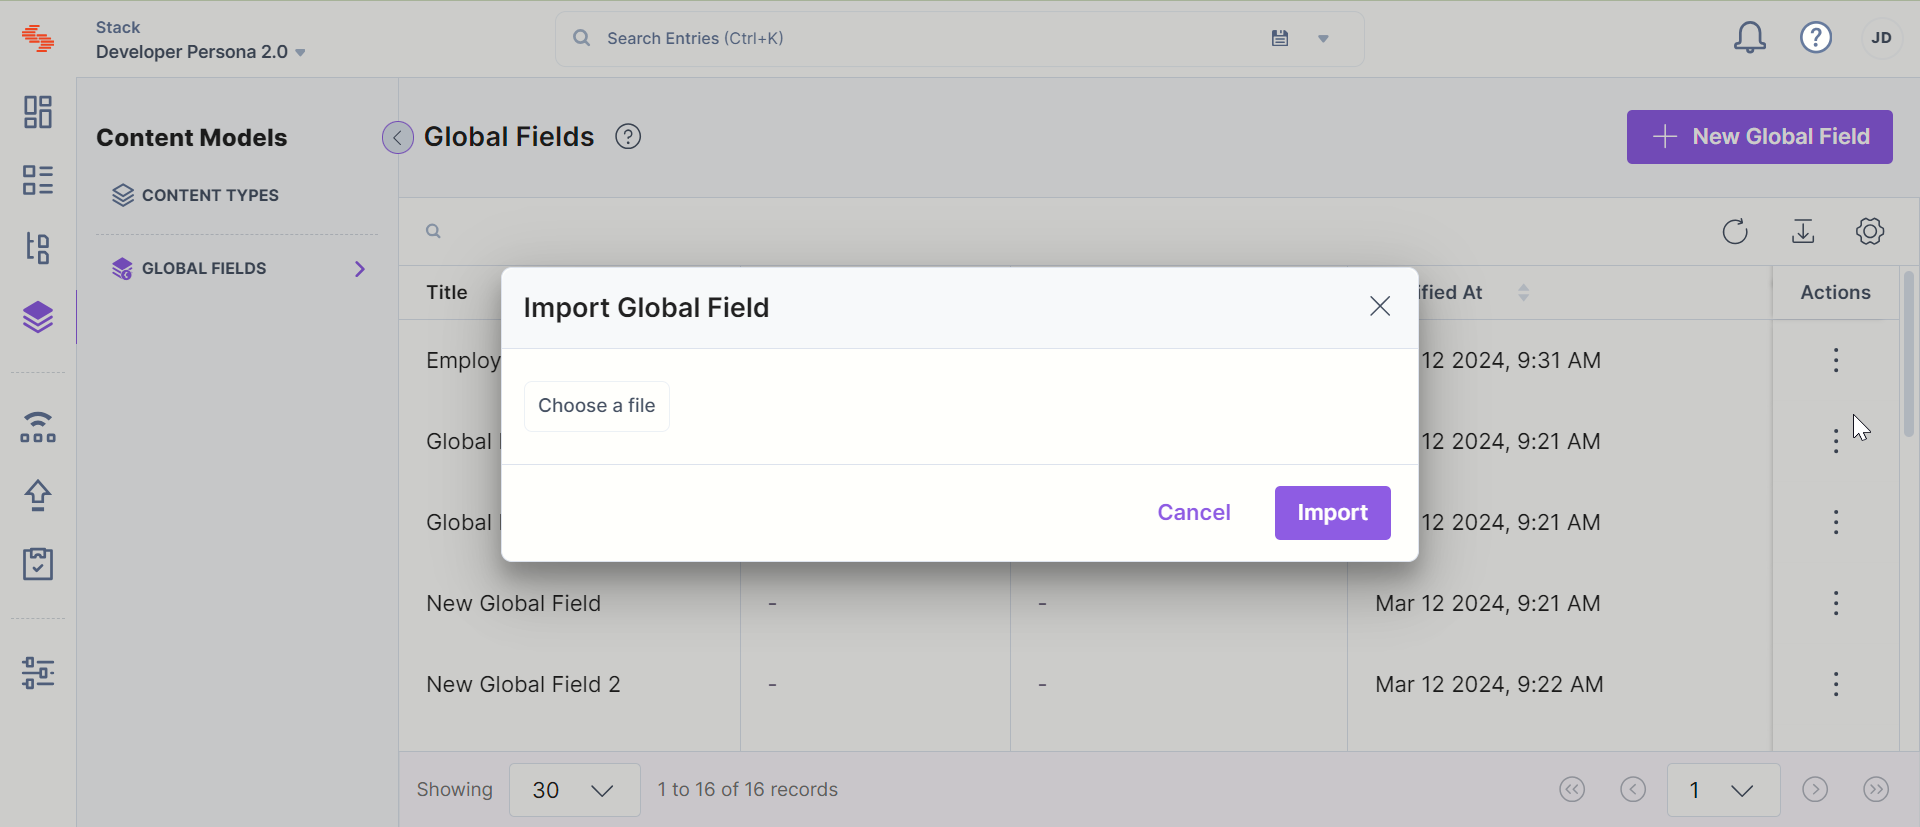 import-global-field-ss2.png